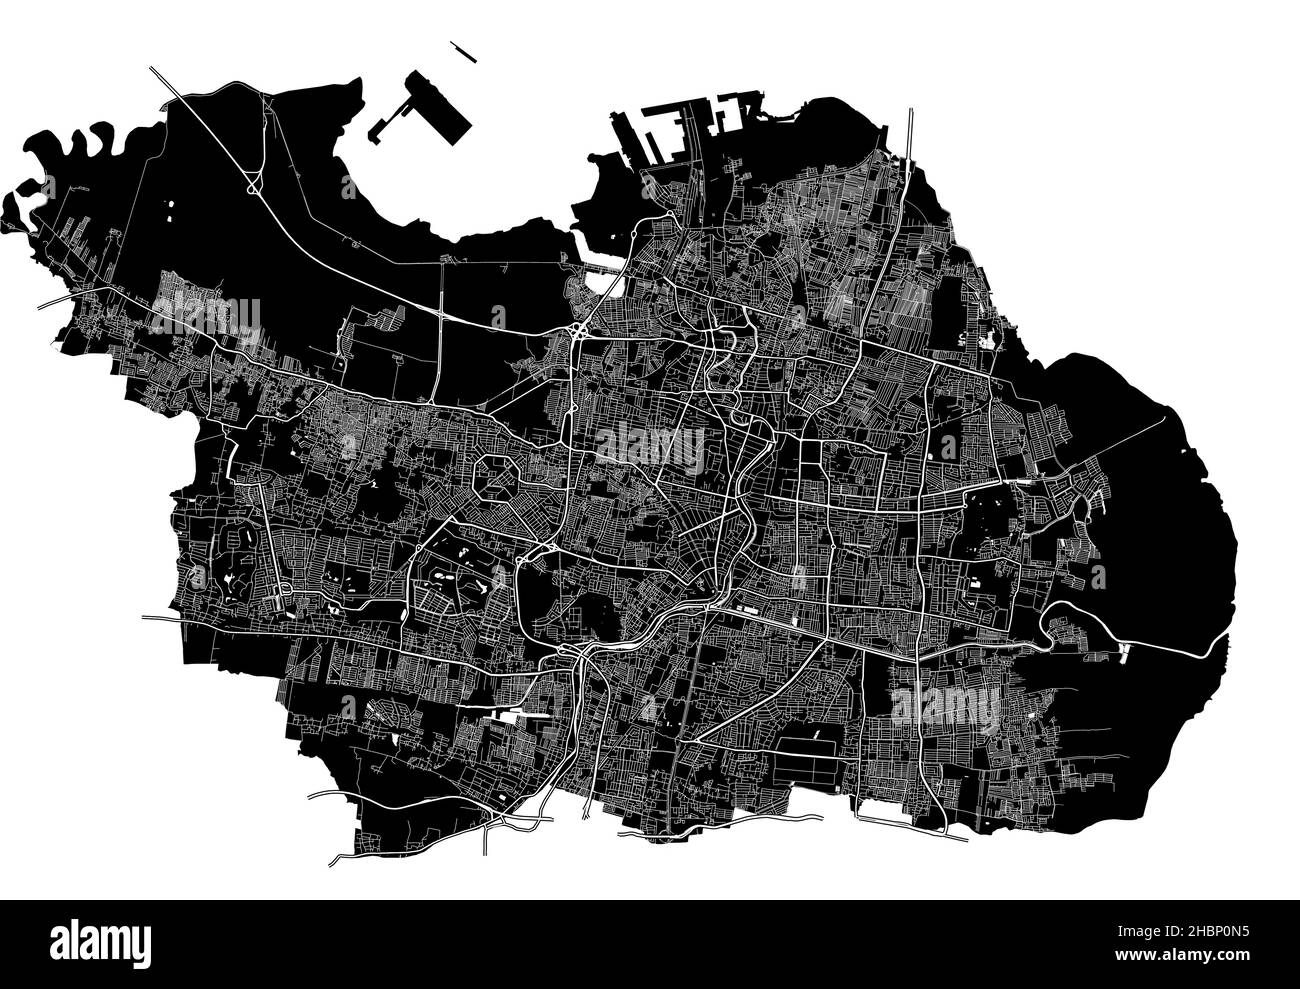 Surabaya, Indonesia, high resolution vector map with city boundaries, and editable paths. The city map was drawn with white areas and lines for main r Stock Vector